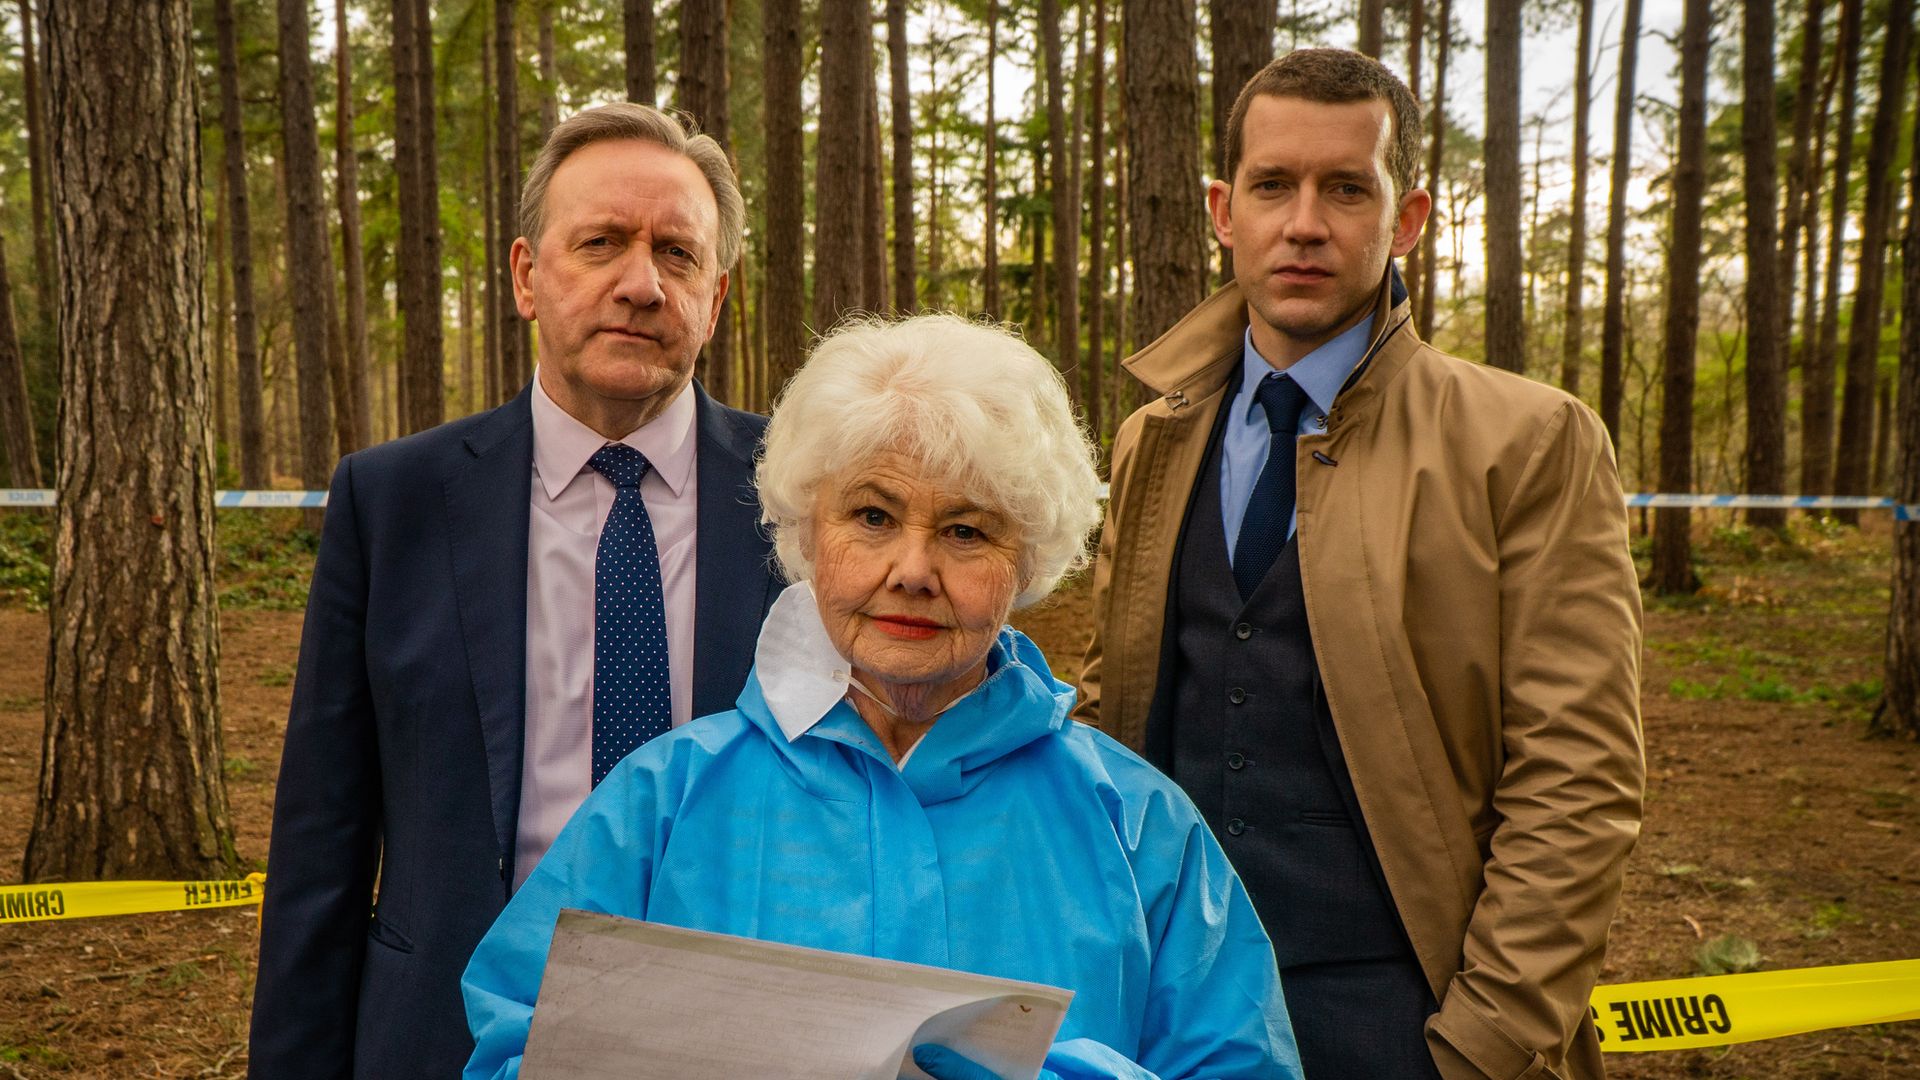 NEIL DUDGEON as DCI John Barnaby, ANNETTE BADLAND as Fleur Perkins and NICK HENDRIX as DS Jamie Winter in Midsomer Murders